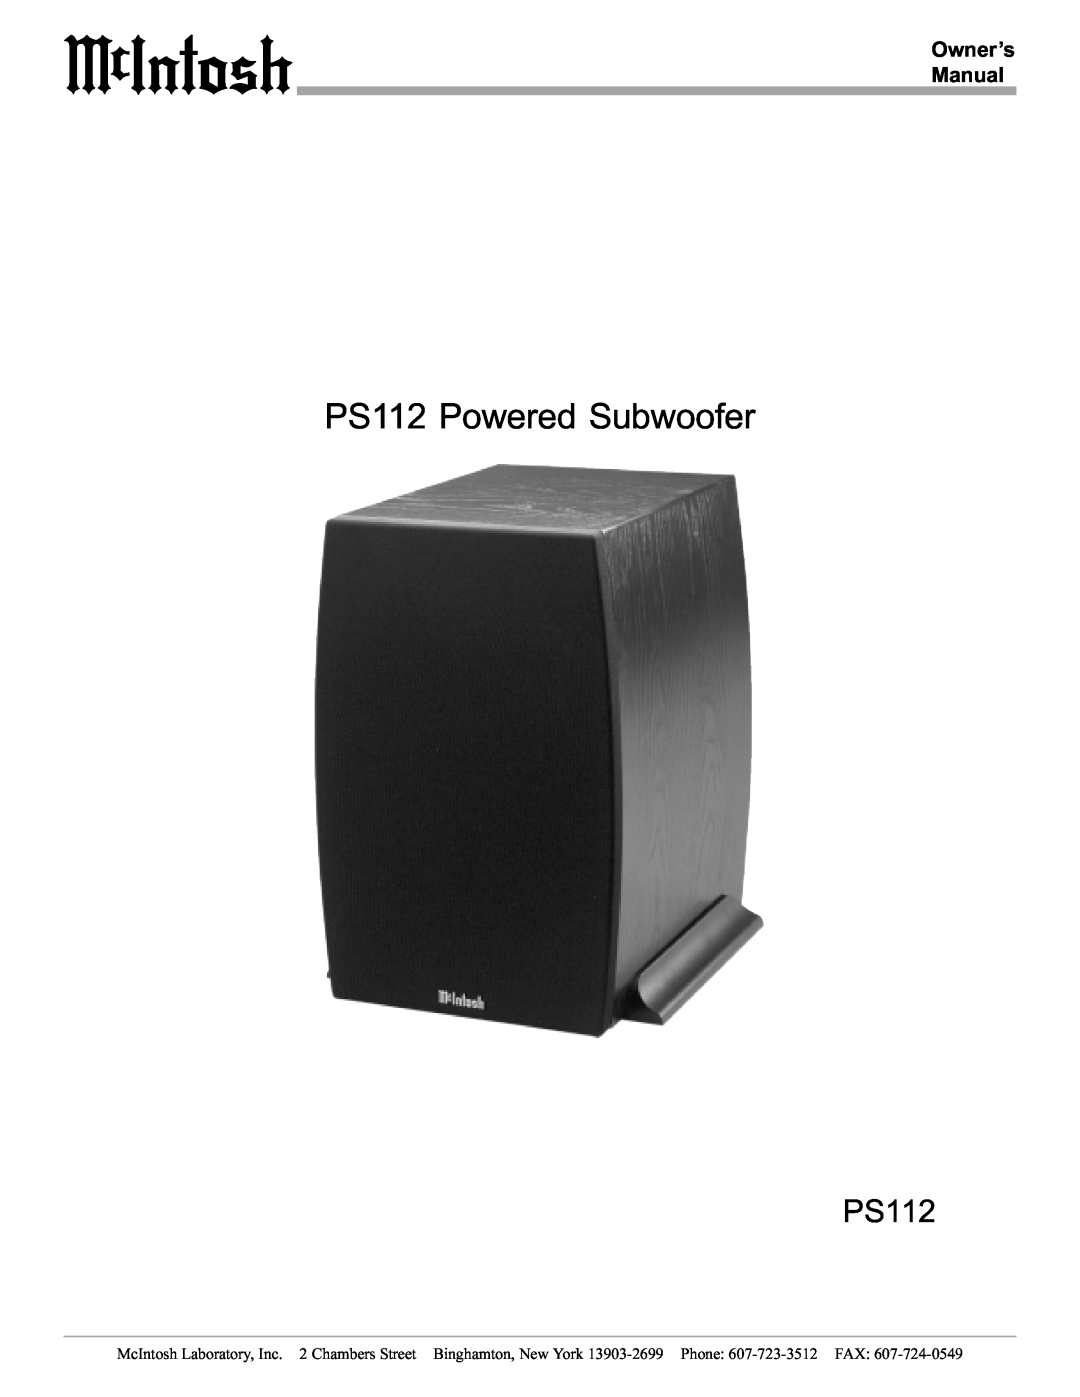 McIntosh manual PS112 Powered Subwoofer 